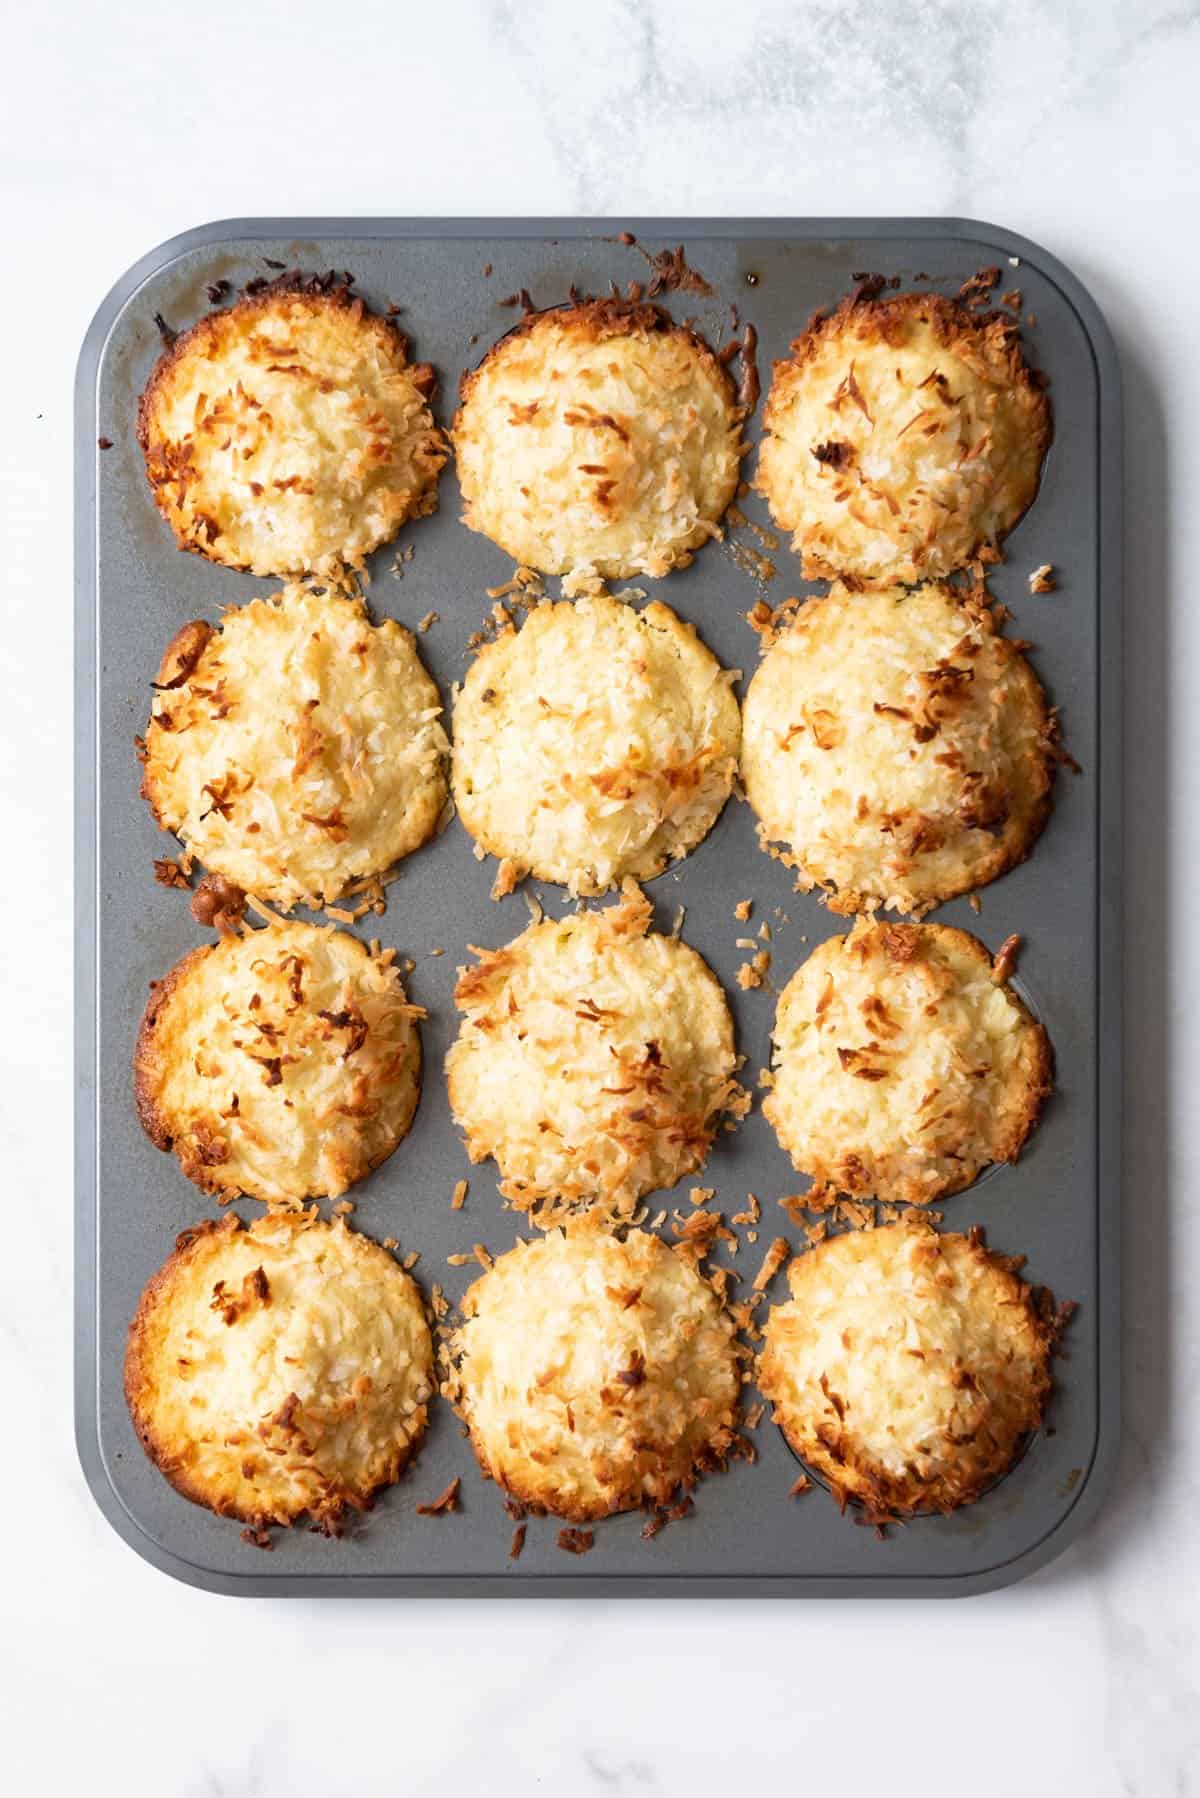 A dozen baked muffins with toasted coconut on top.